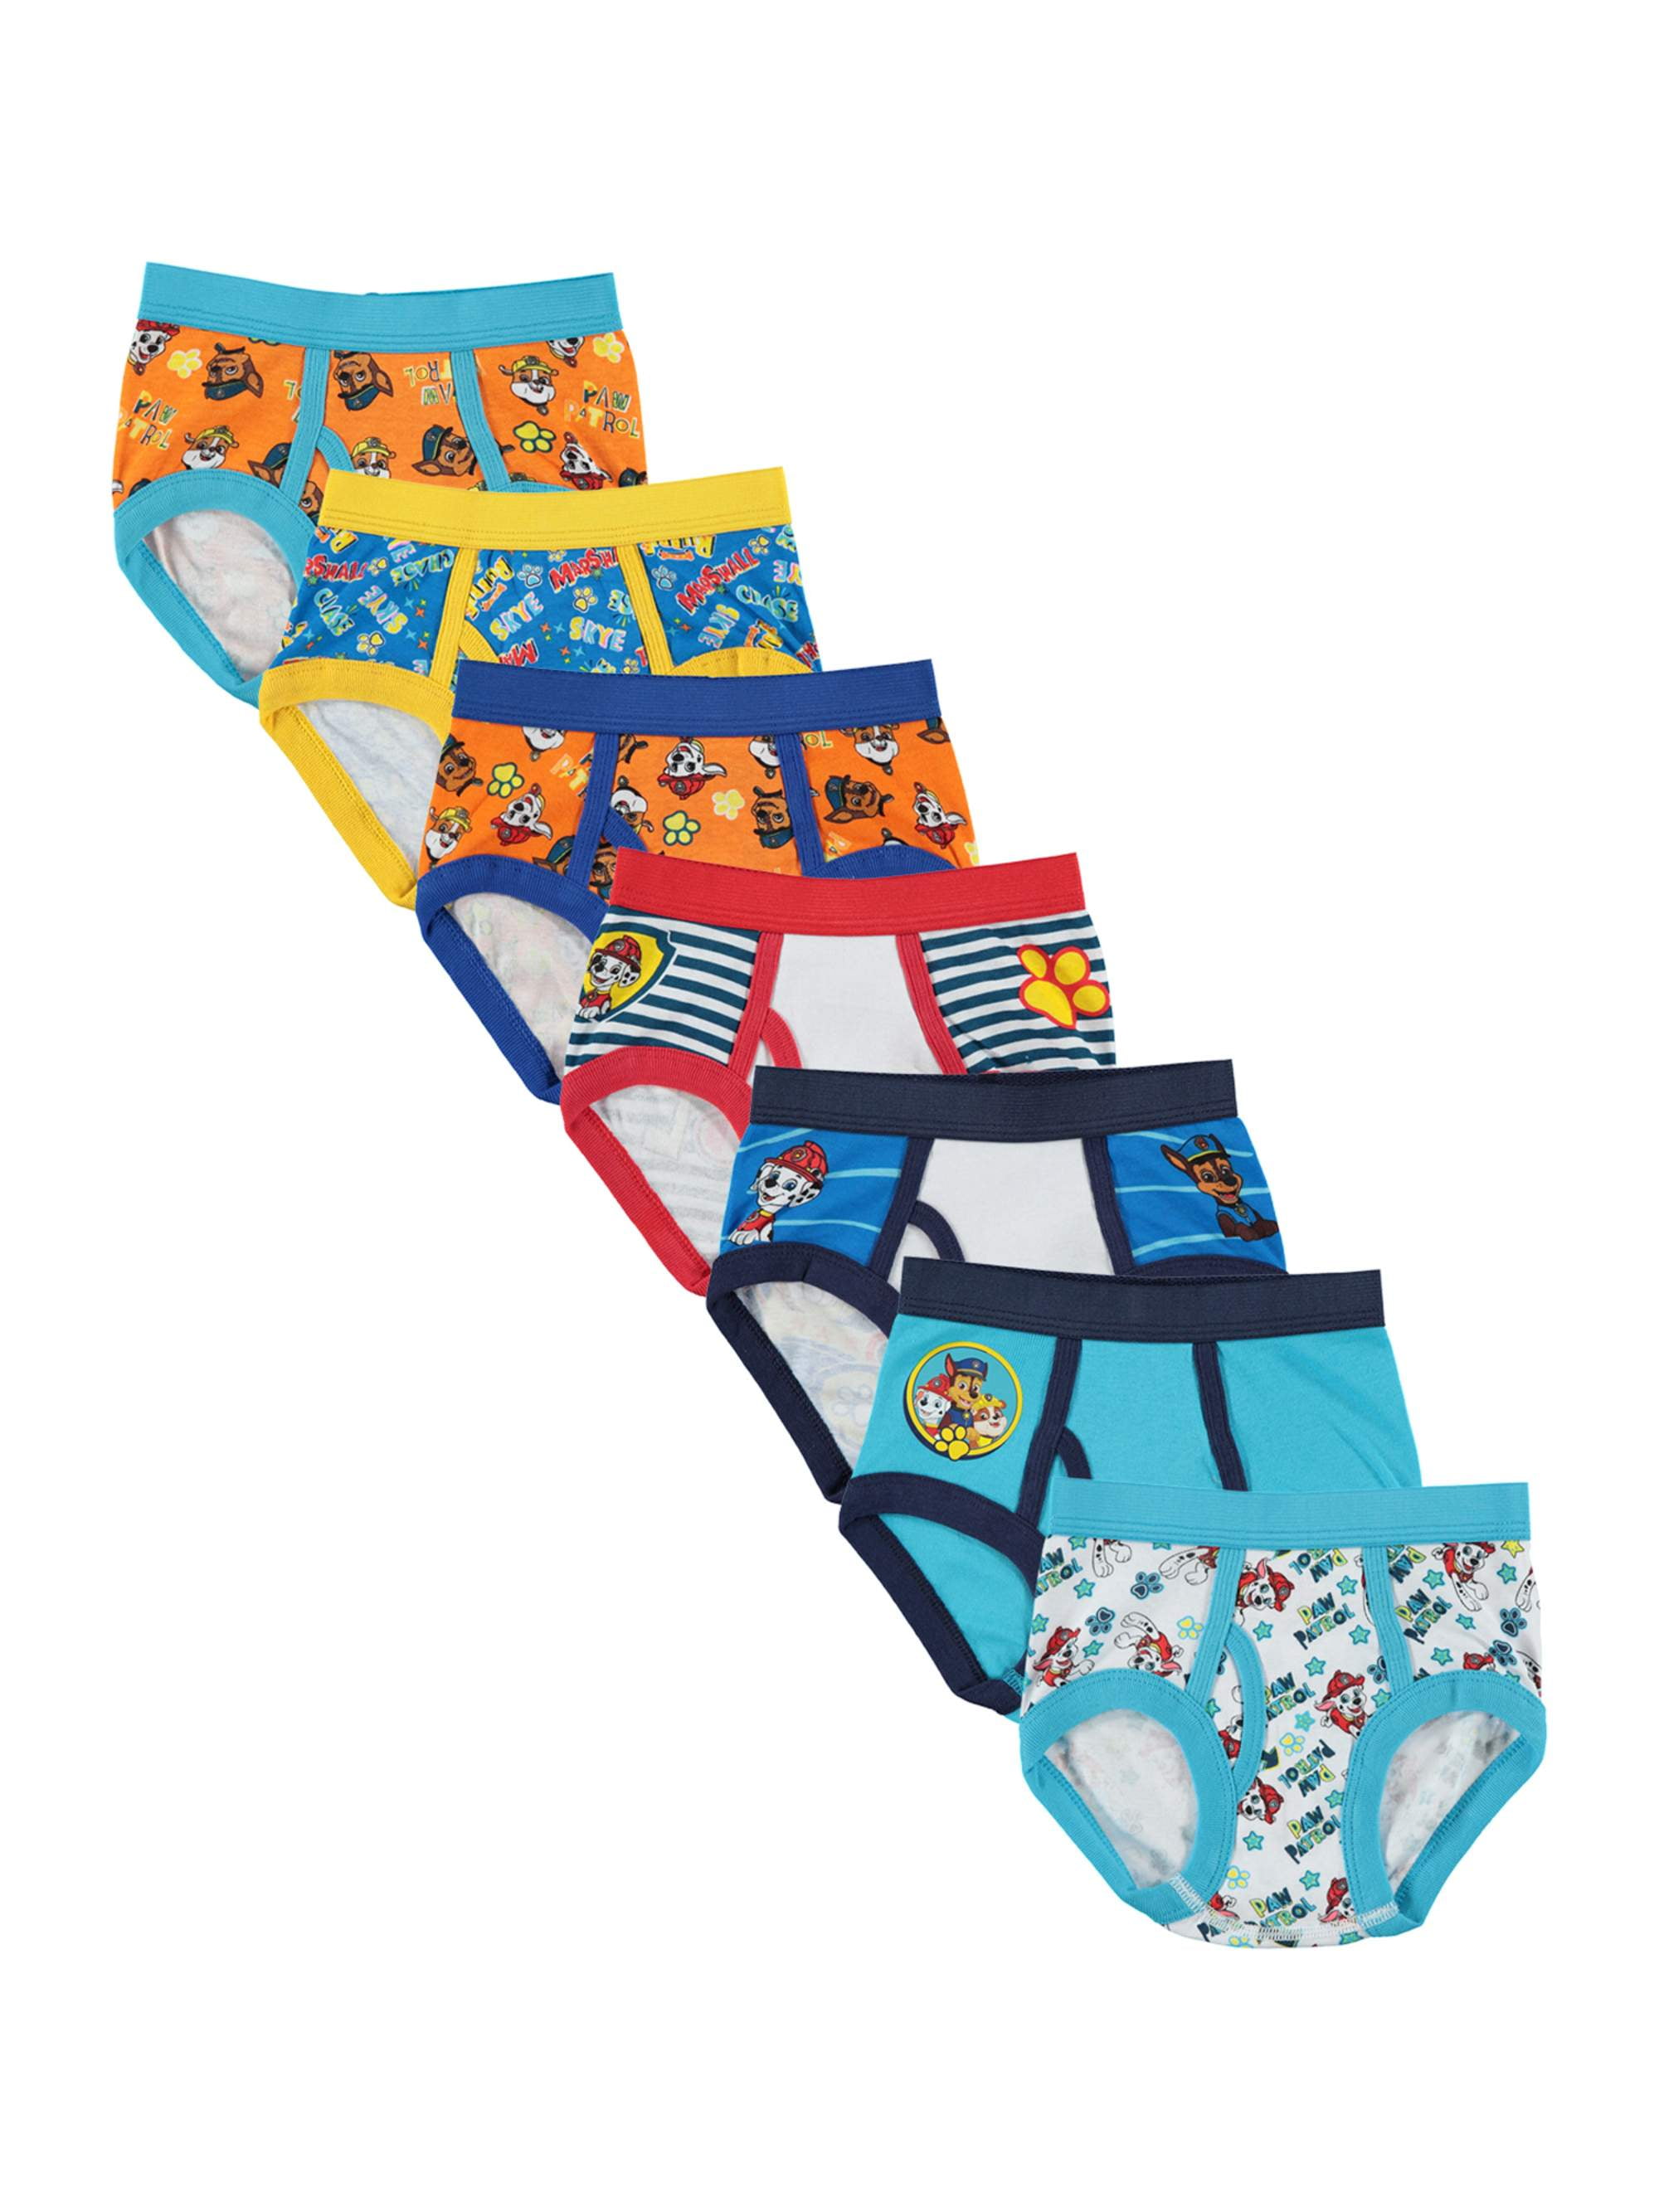 Paw Patrol Toddler Boys Briefs, 6 Pack Sizes 2T-4T 